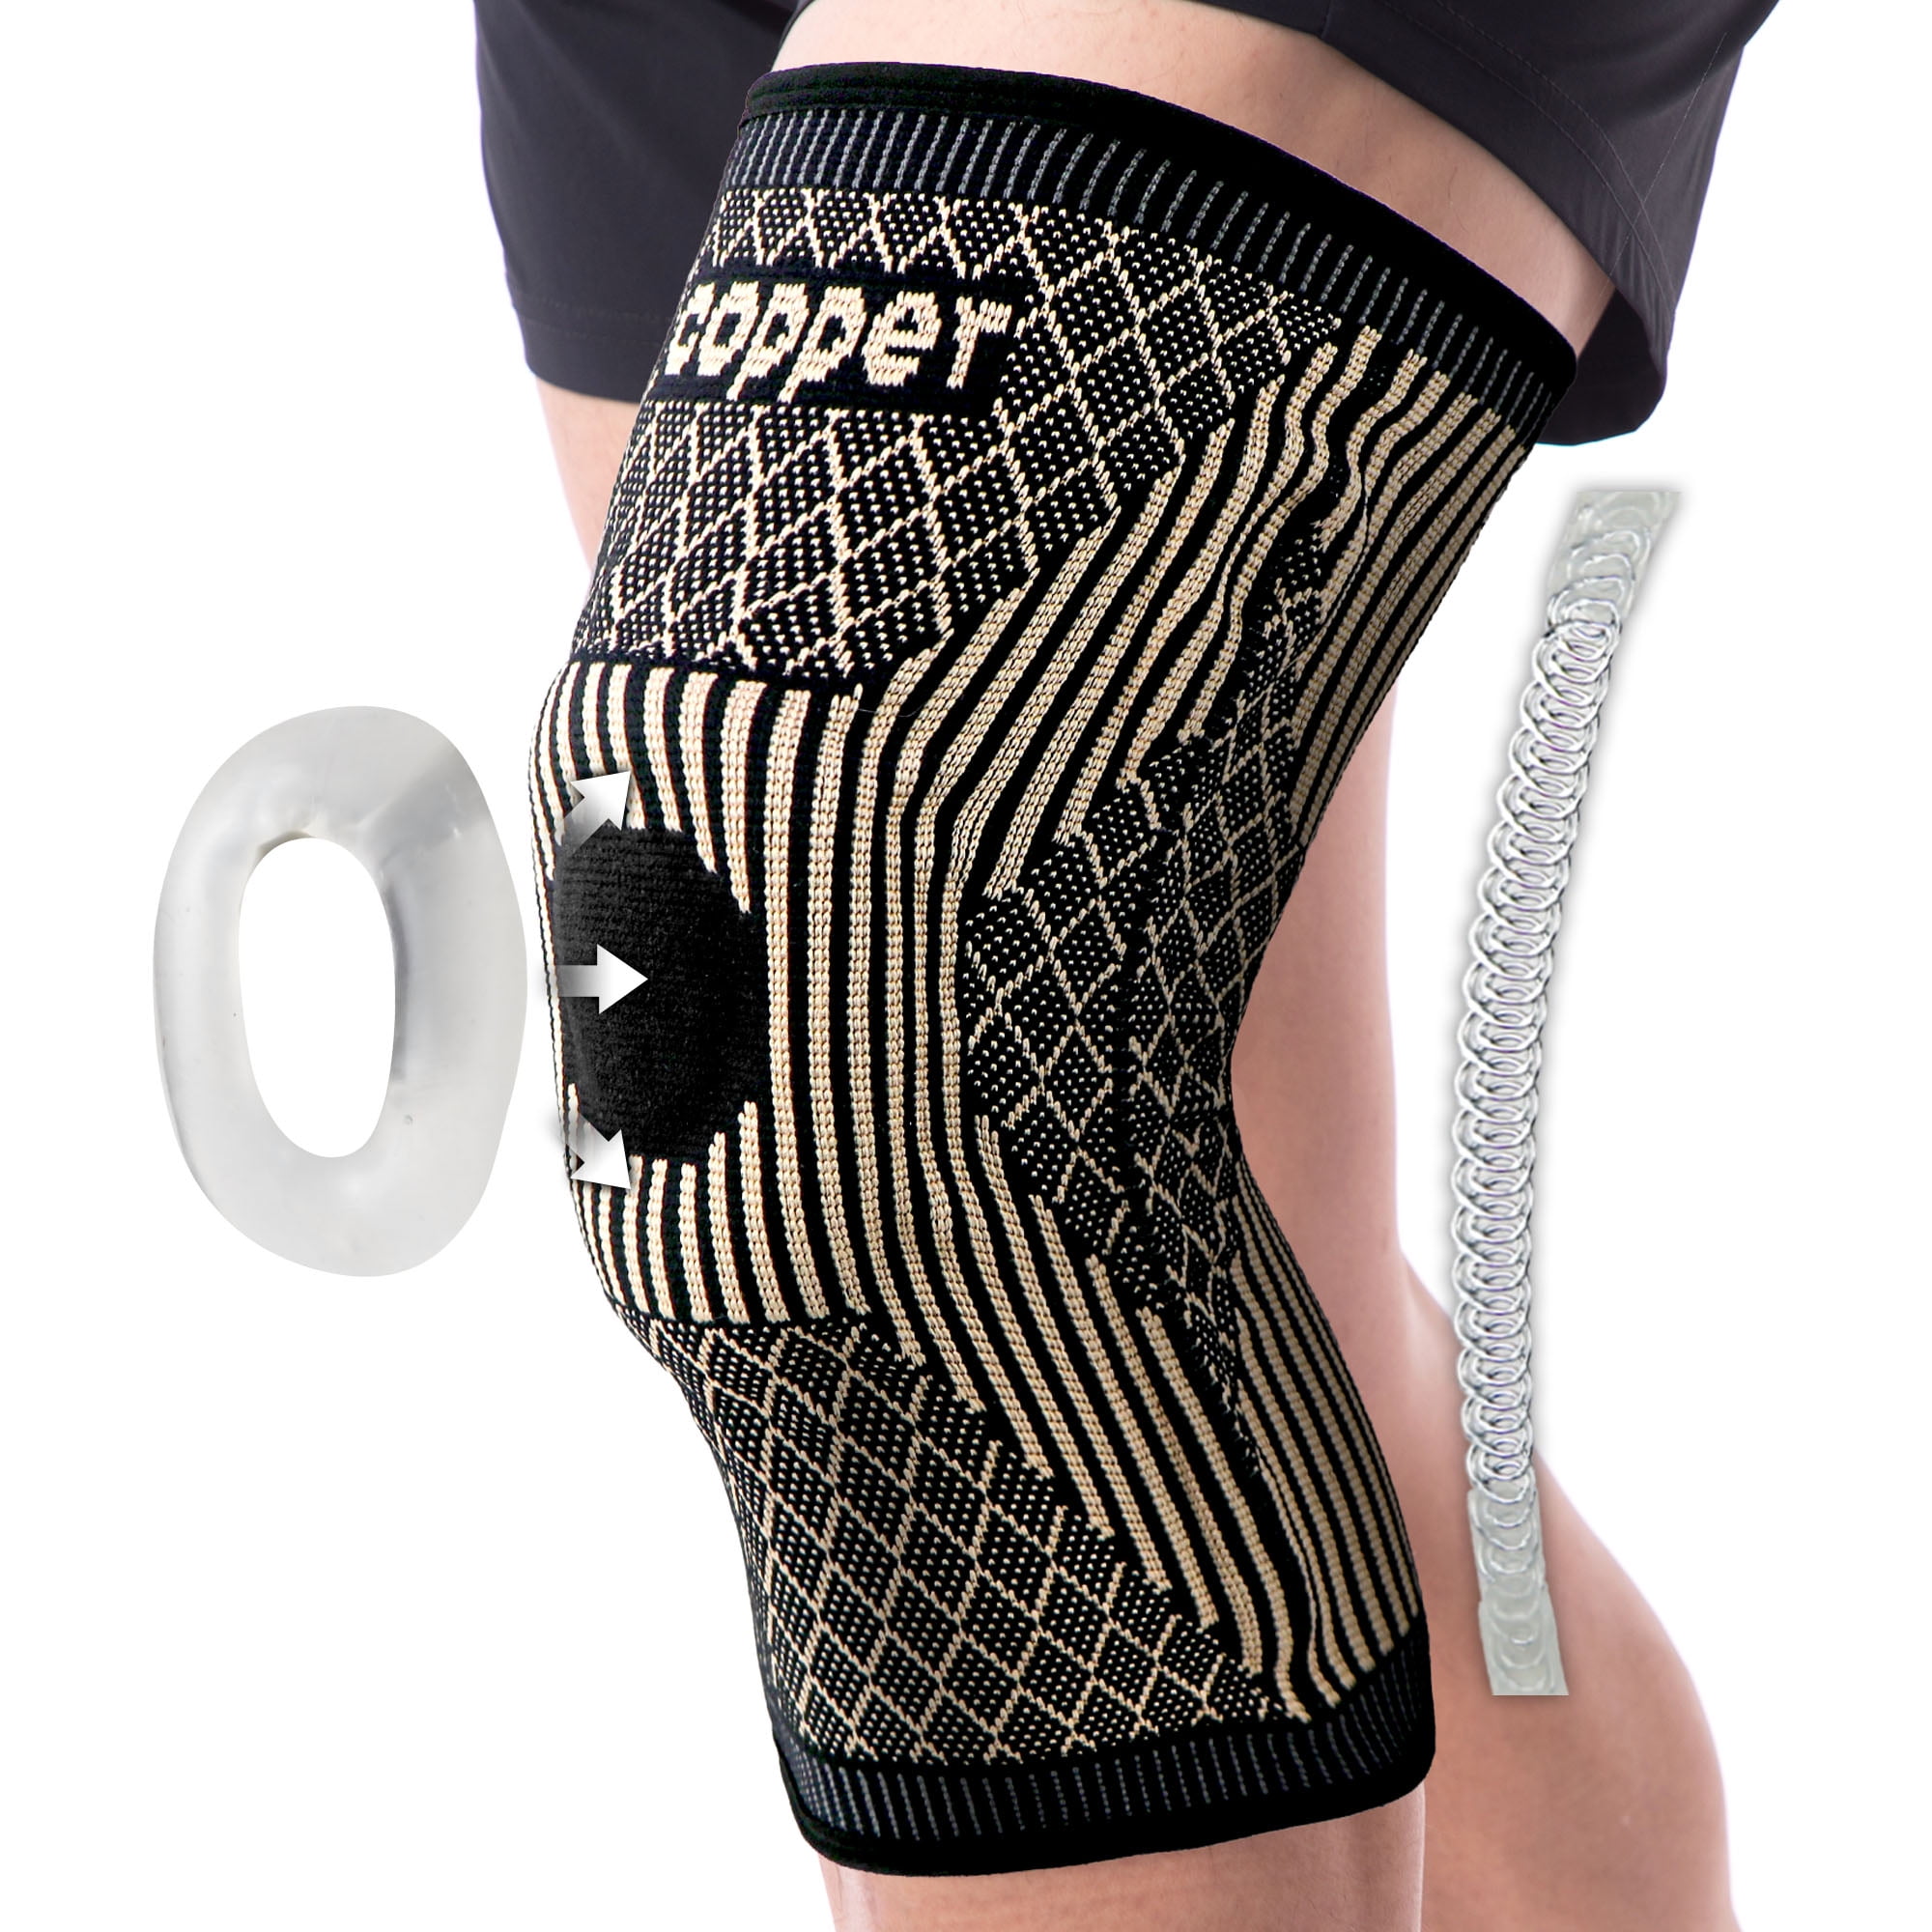 Workout Copper Knee Brace for Arthritis Pain and Support-Copper Knee Sleeve Compression for Sports and Arthritis Relief Exercise